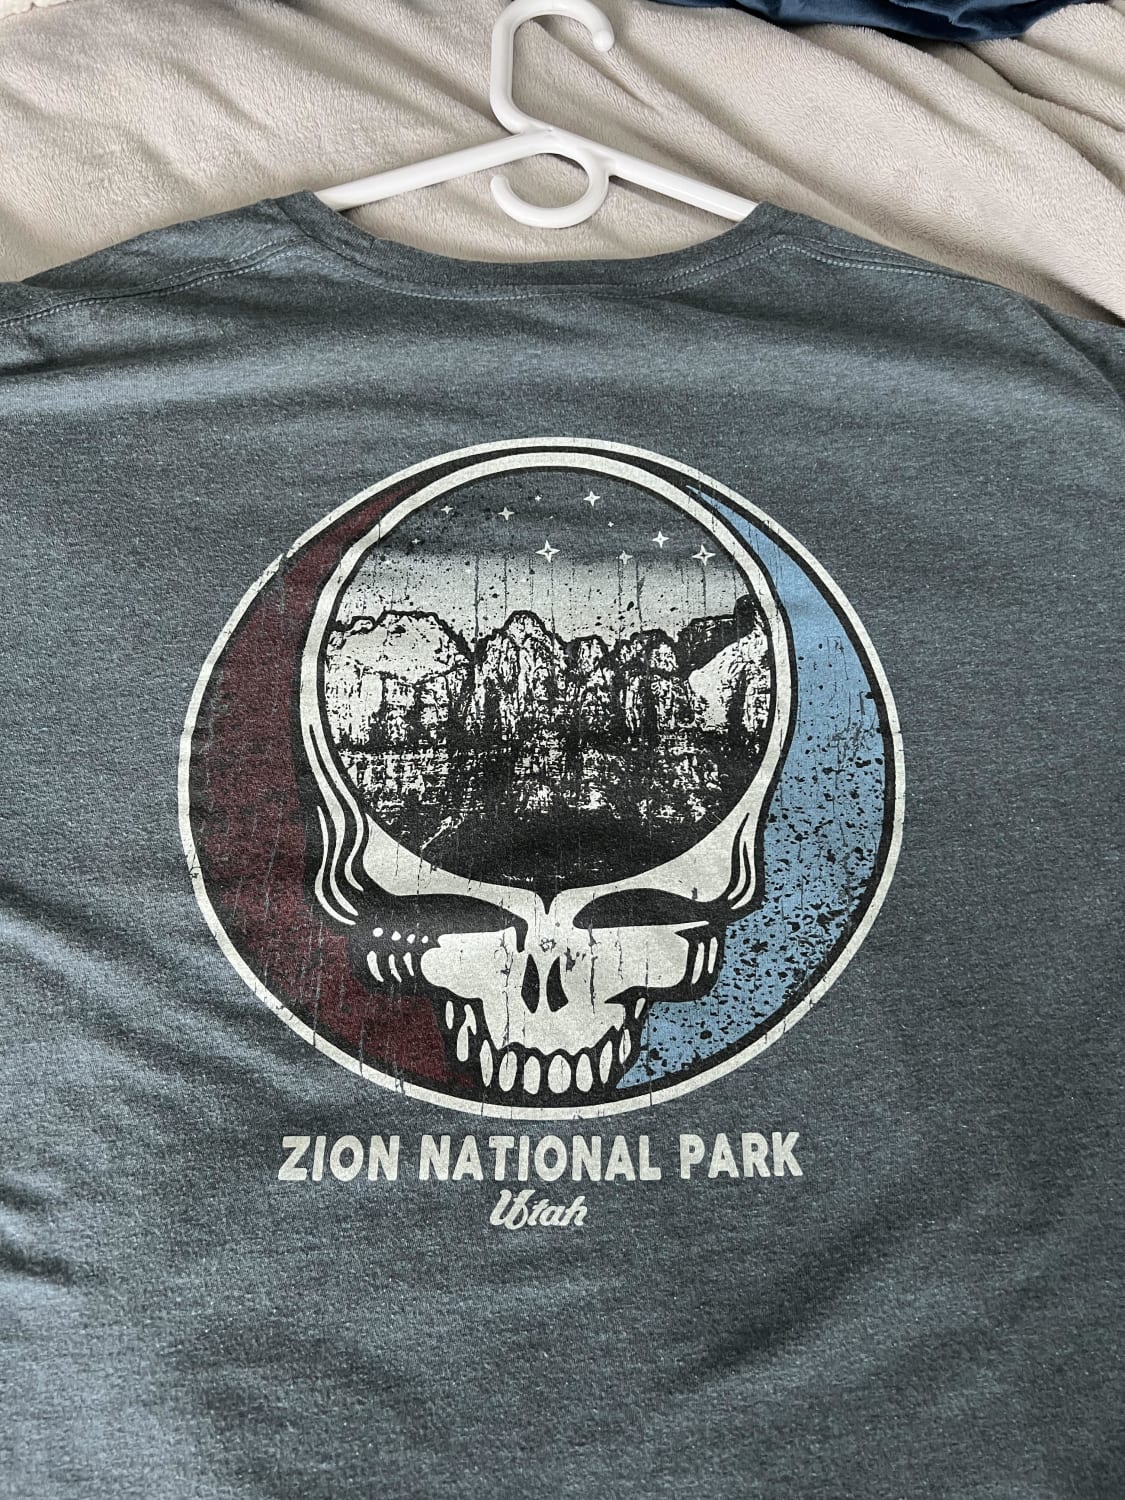 For my Deadhead and Hiking friends out there. Why not combine the two hobbies? I actually got this at the Zion visitor center.